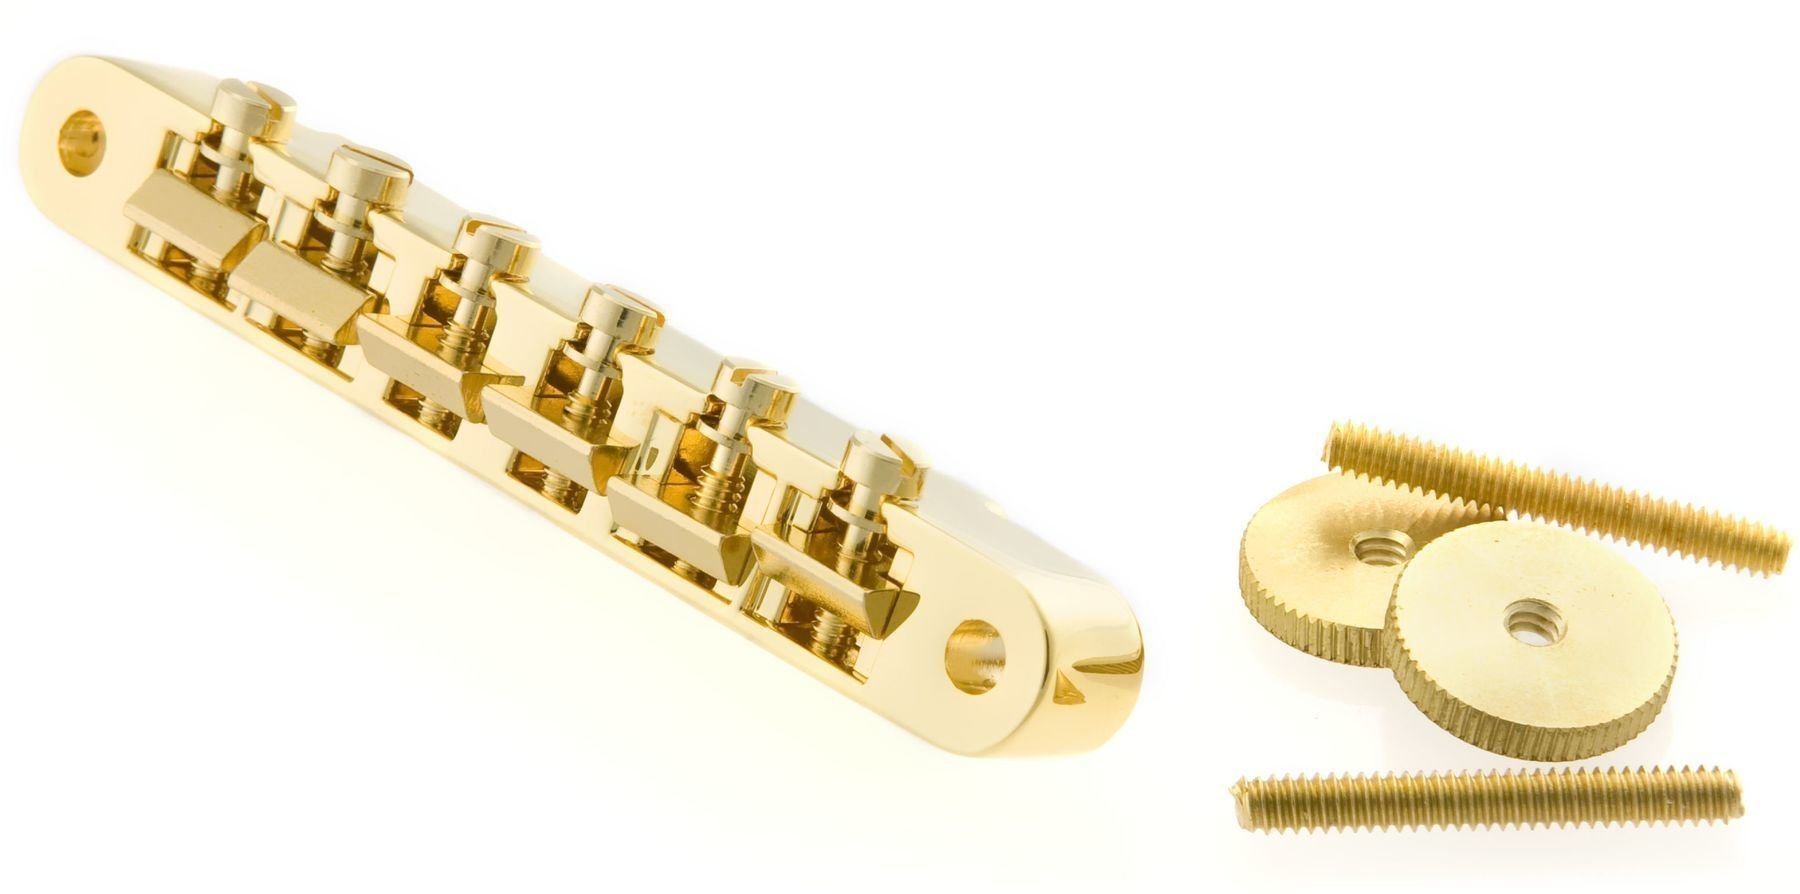 Spare Part for Guitar Gibson PBBR-065 Historic Non-wire ABR-1 Gold